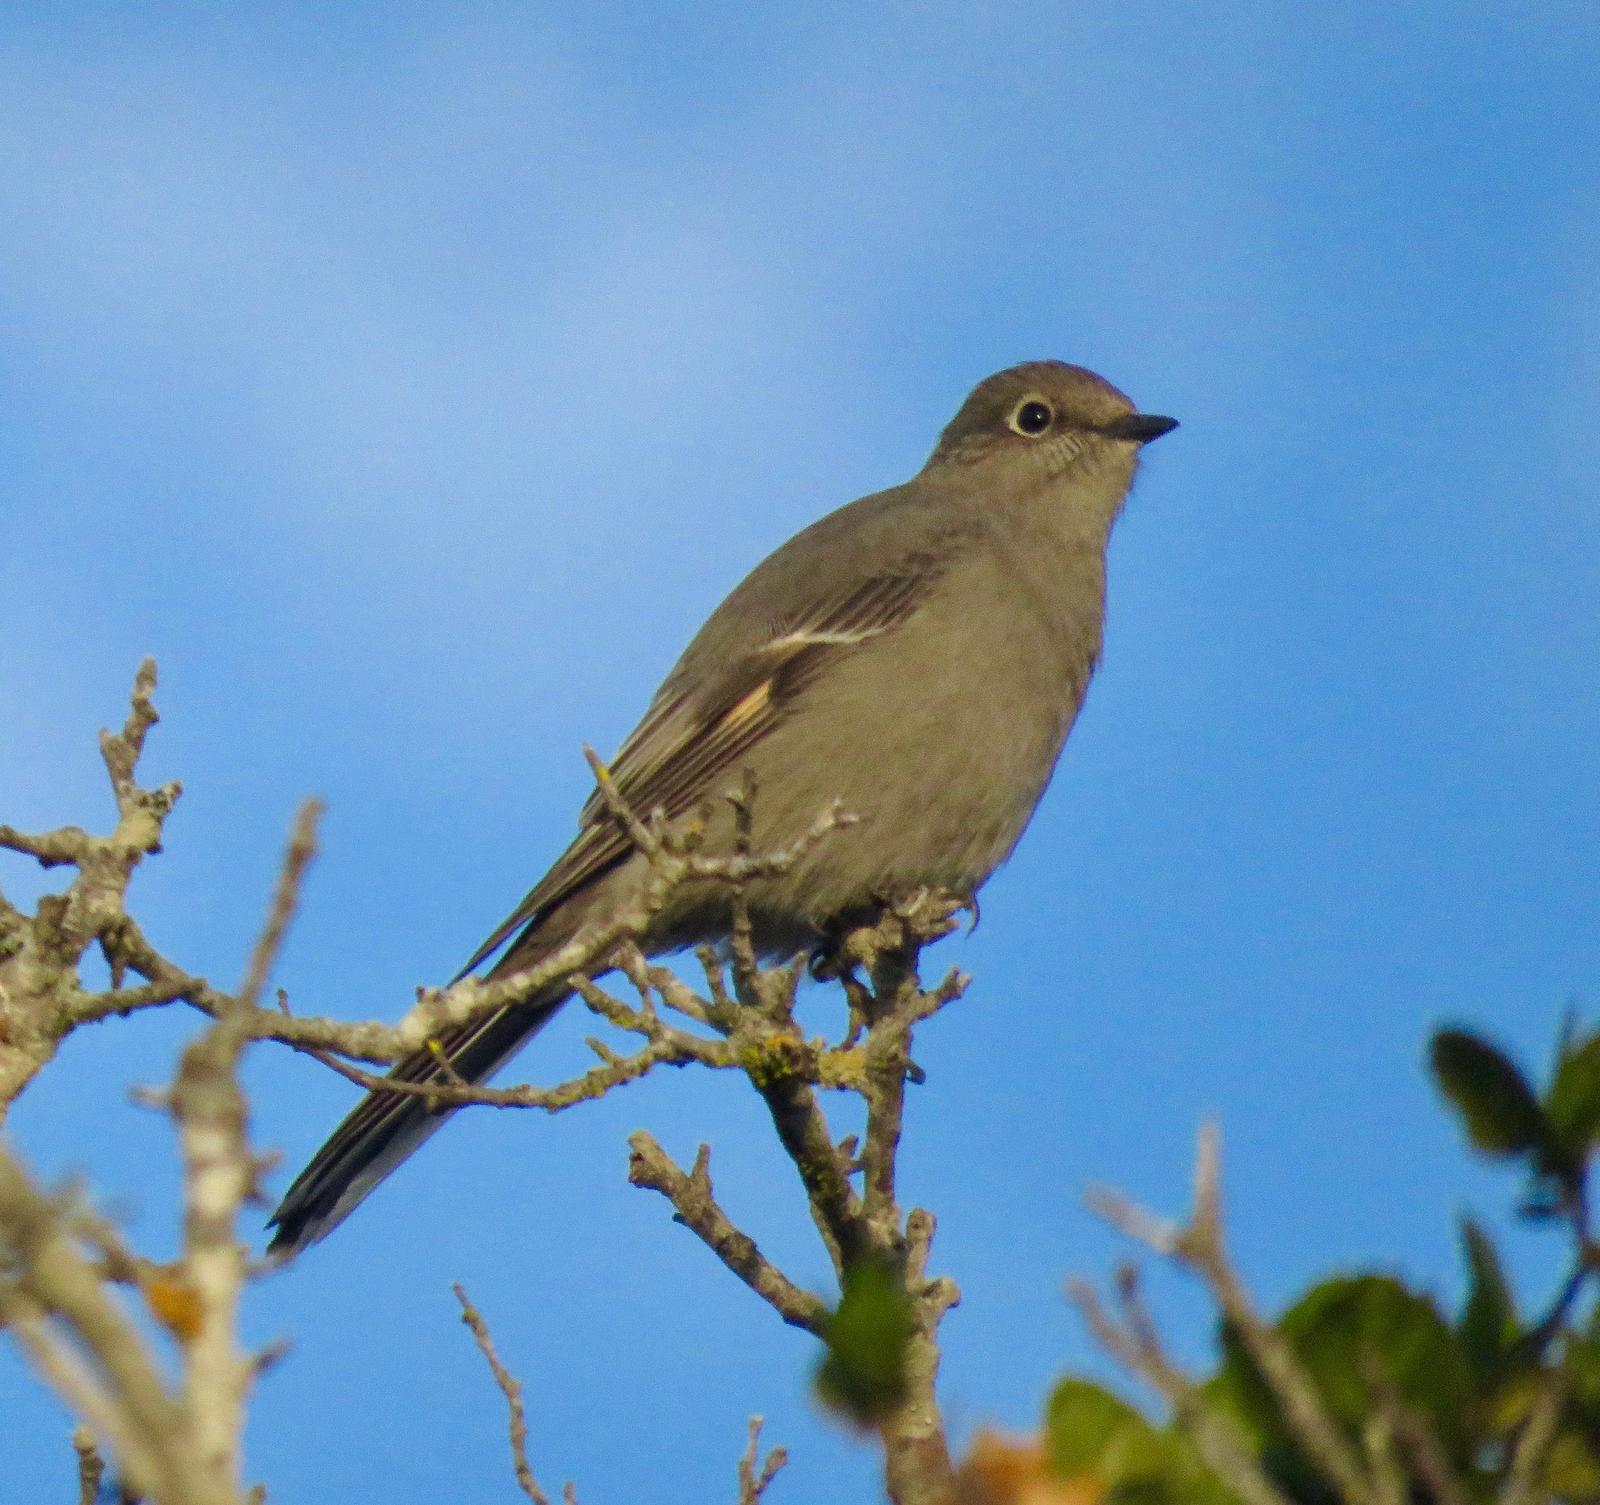 Townsend's Solitaire Photo by Don Glasco